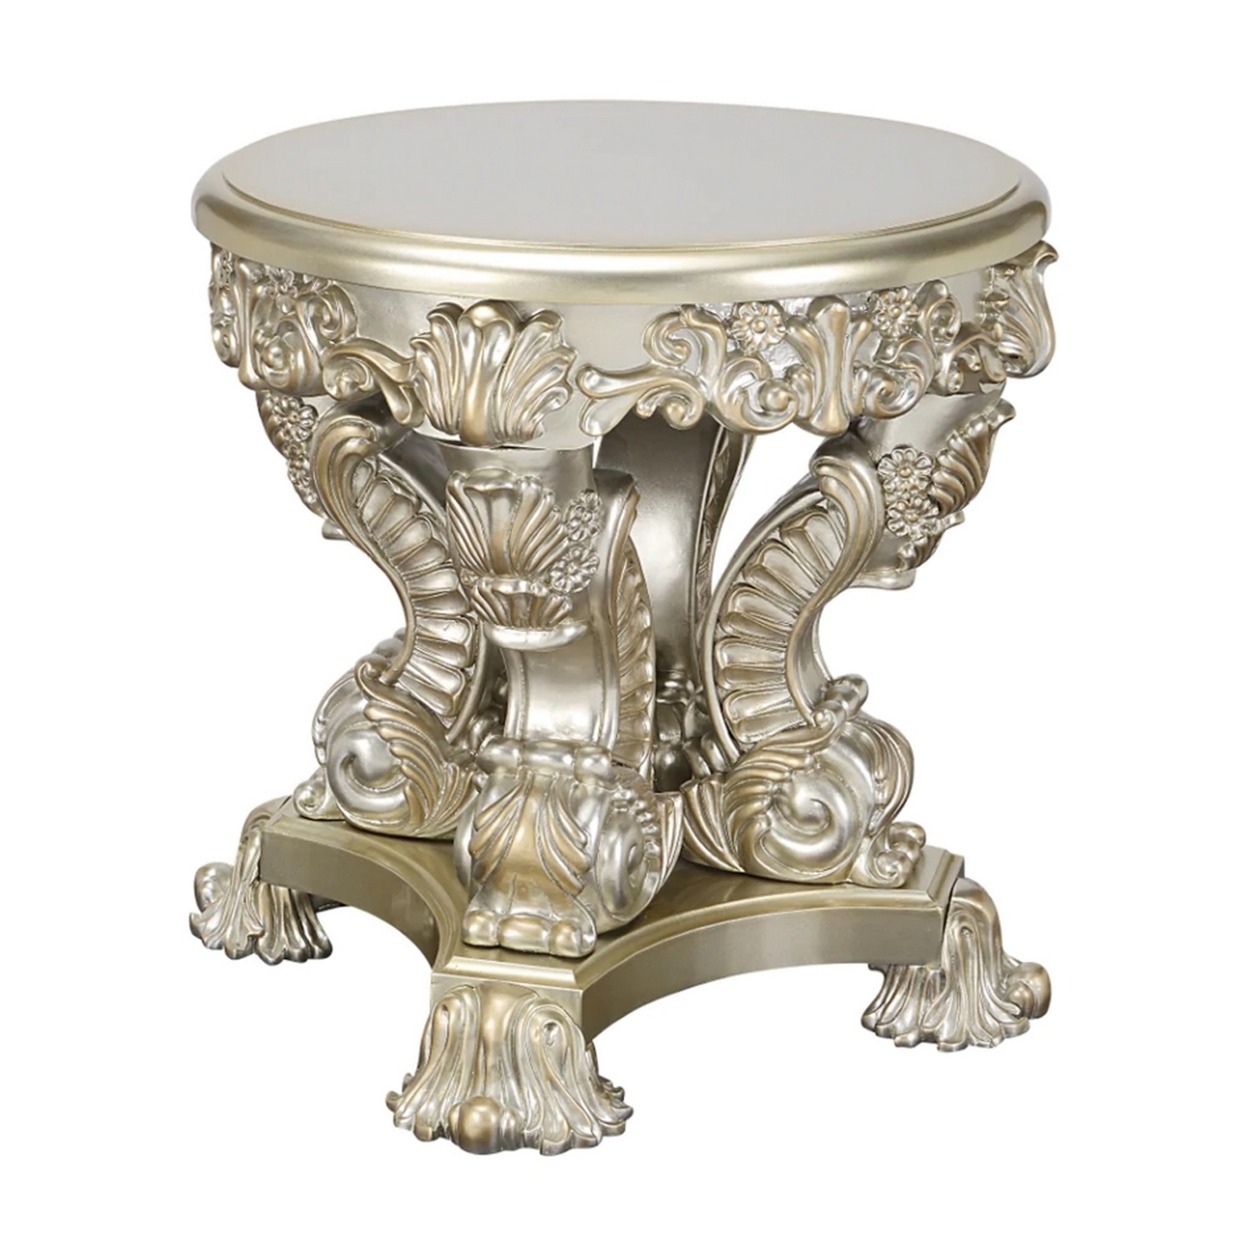 Esen 28 Inch Round End Table, Sculpted Floral Carvings, Resin, Antique Gold- Saltoro Sherpi